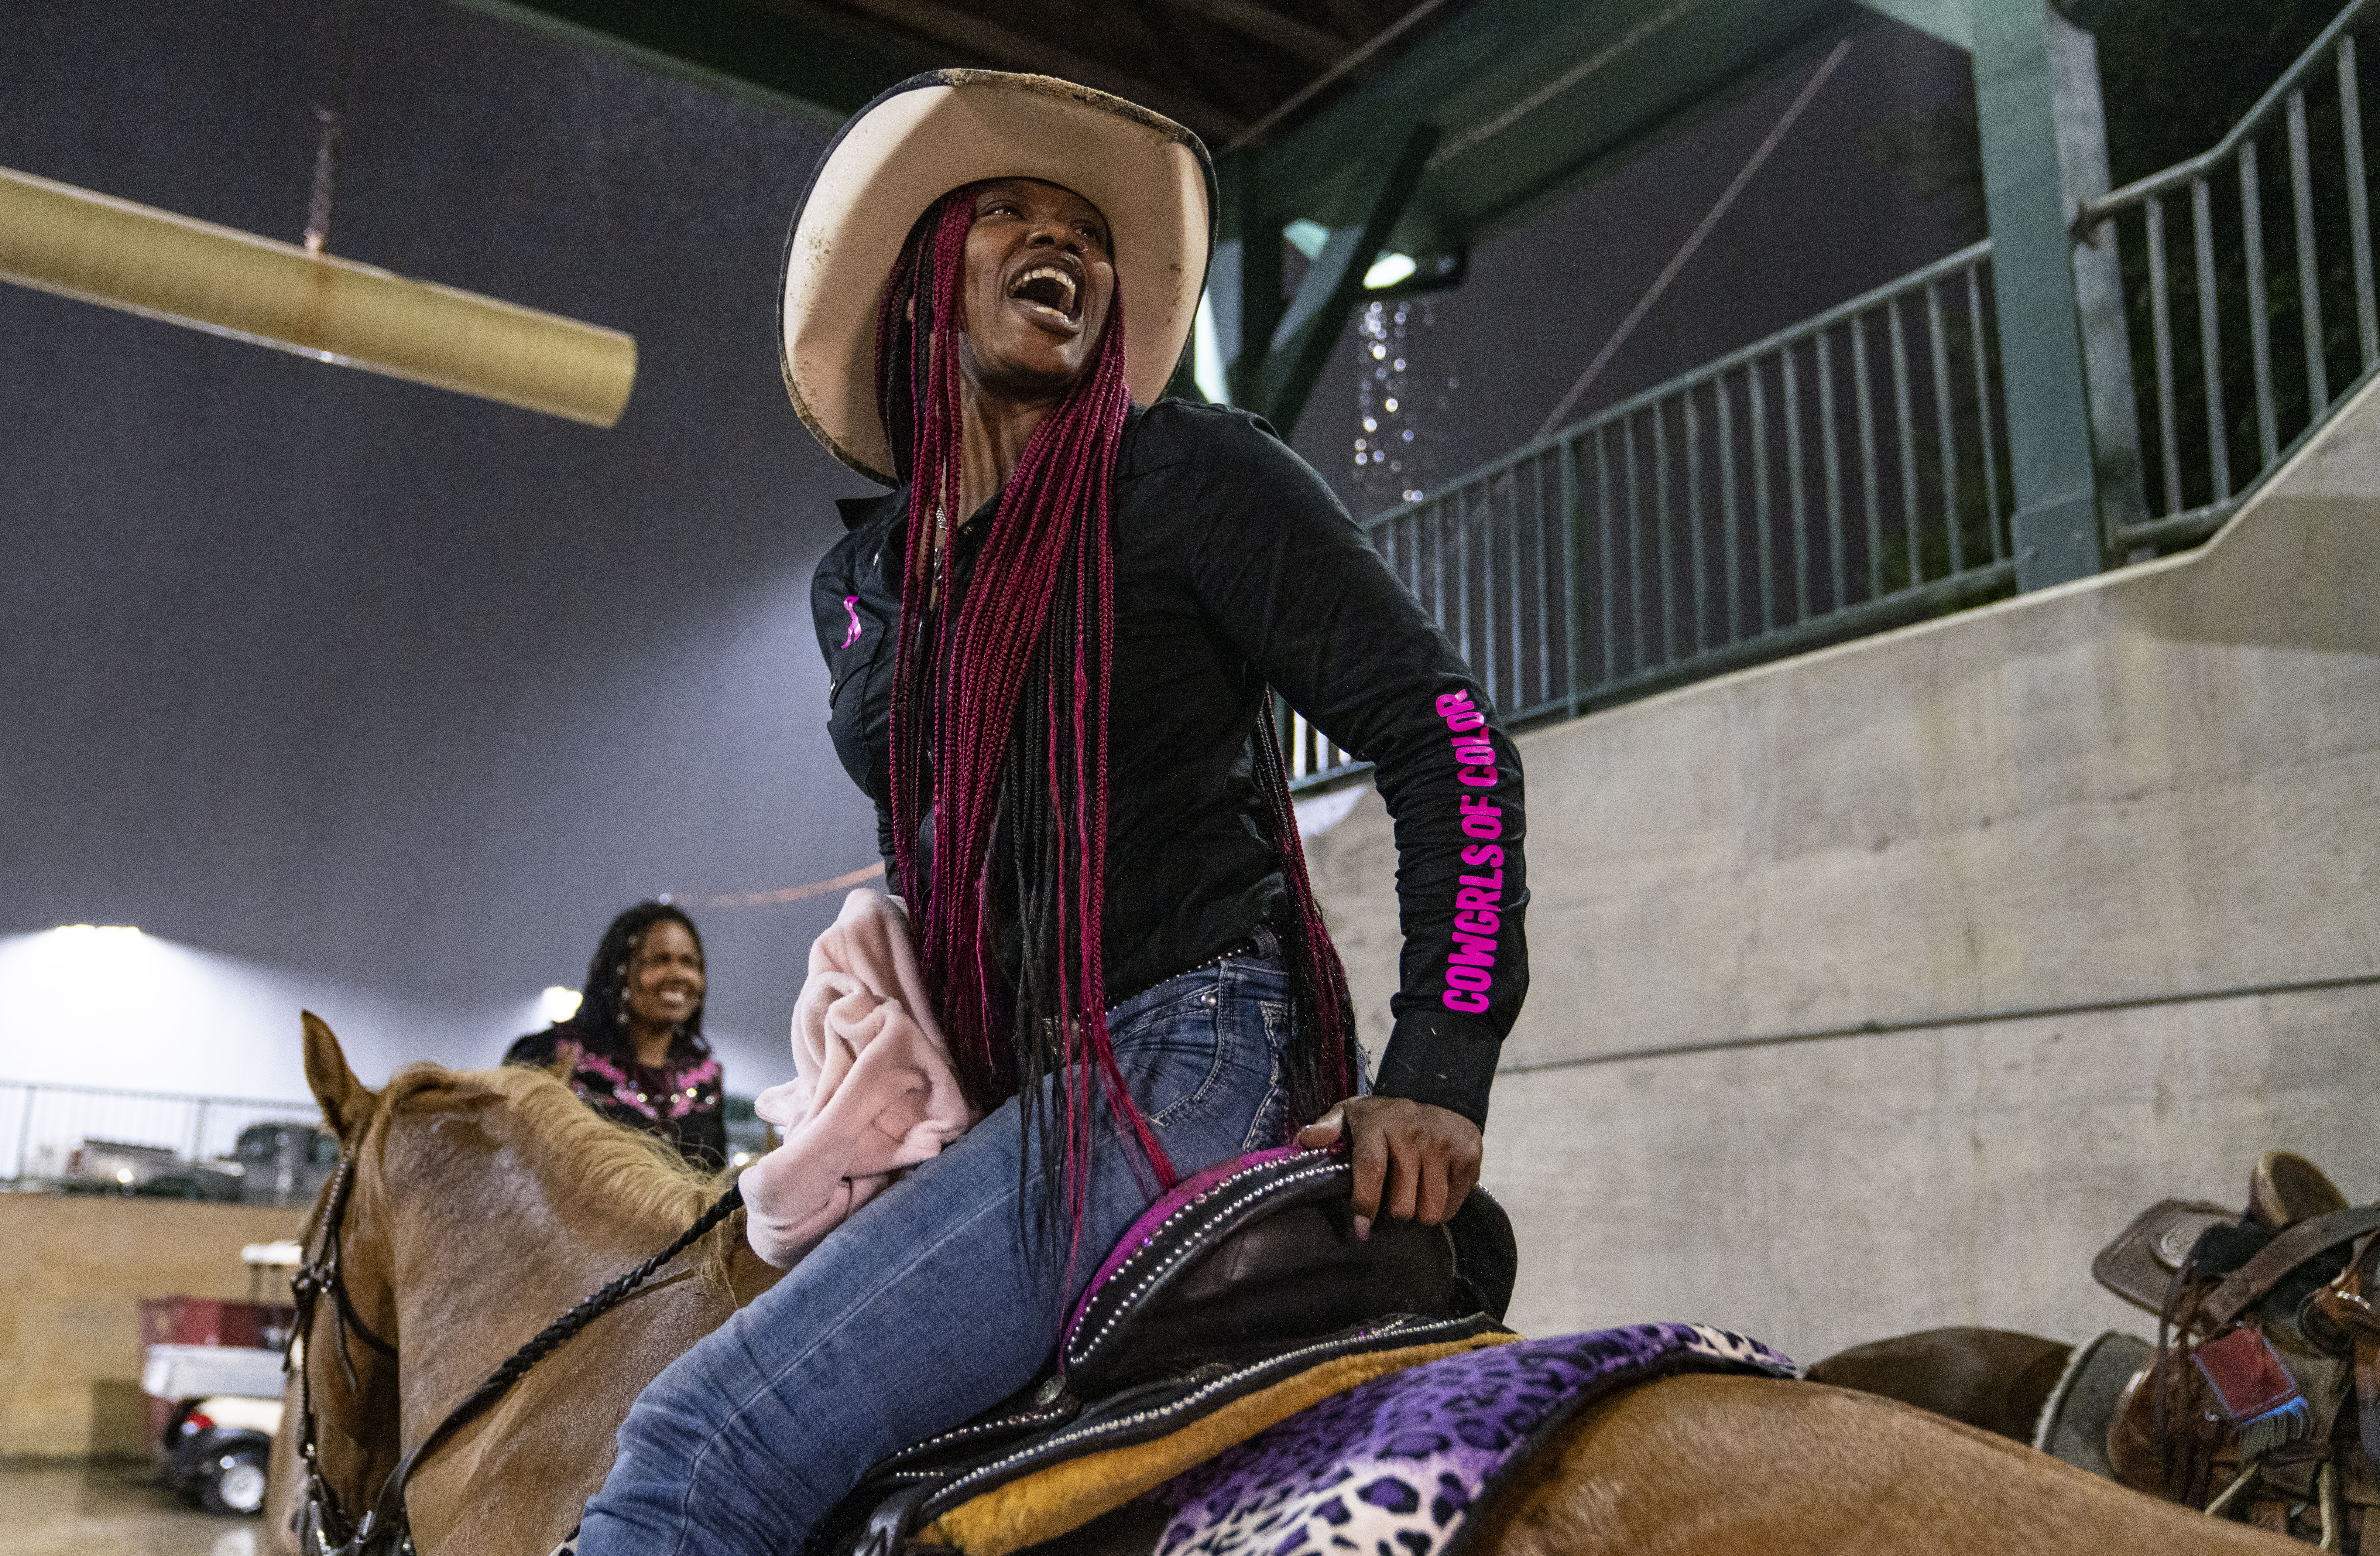 Photos of Black cowboys and cowgirls - The Washington Post